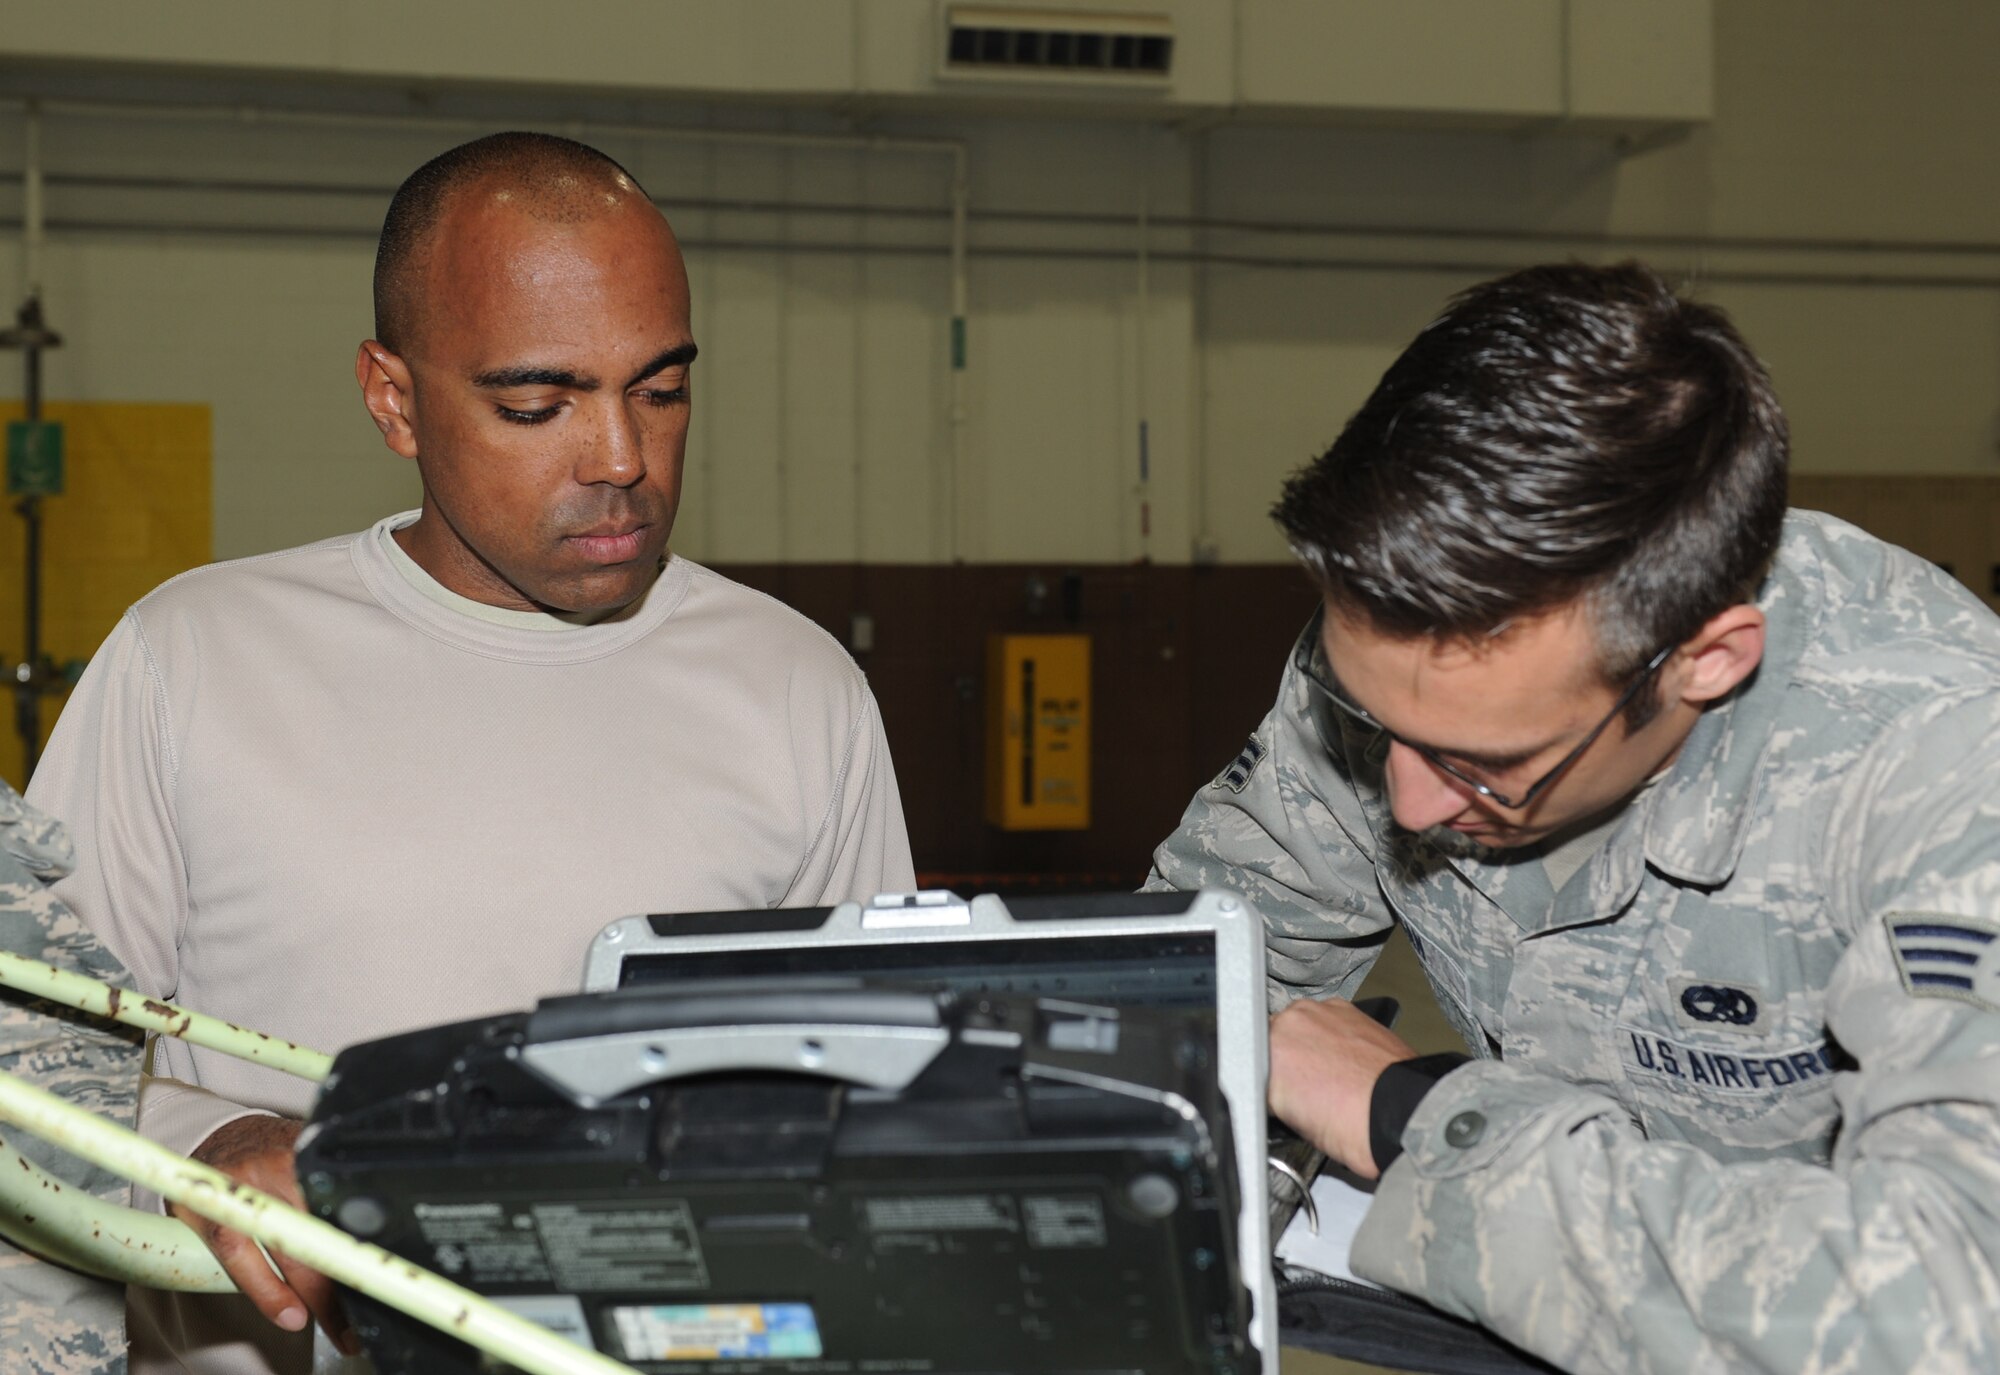 Tech. Sgt. Roberto Rodriguez, left, and Senior Airman Christopher Morgan, 22nd Aircraft Maintenance Squadron aerospace propulsion technicians, document information gathered during a high-winds inspection on a KC-135 Stratotanker, April 3, 2015, at McConnell Air Force Base, Kan. These inspections are performed after aircraft are exposed to unusually high-speed winds. (U.S. Air Force photo by Airman 1st Class Tara Fadenrecht)